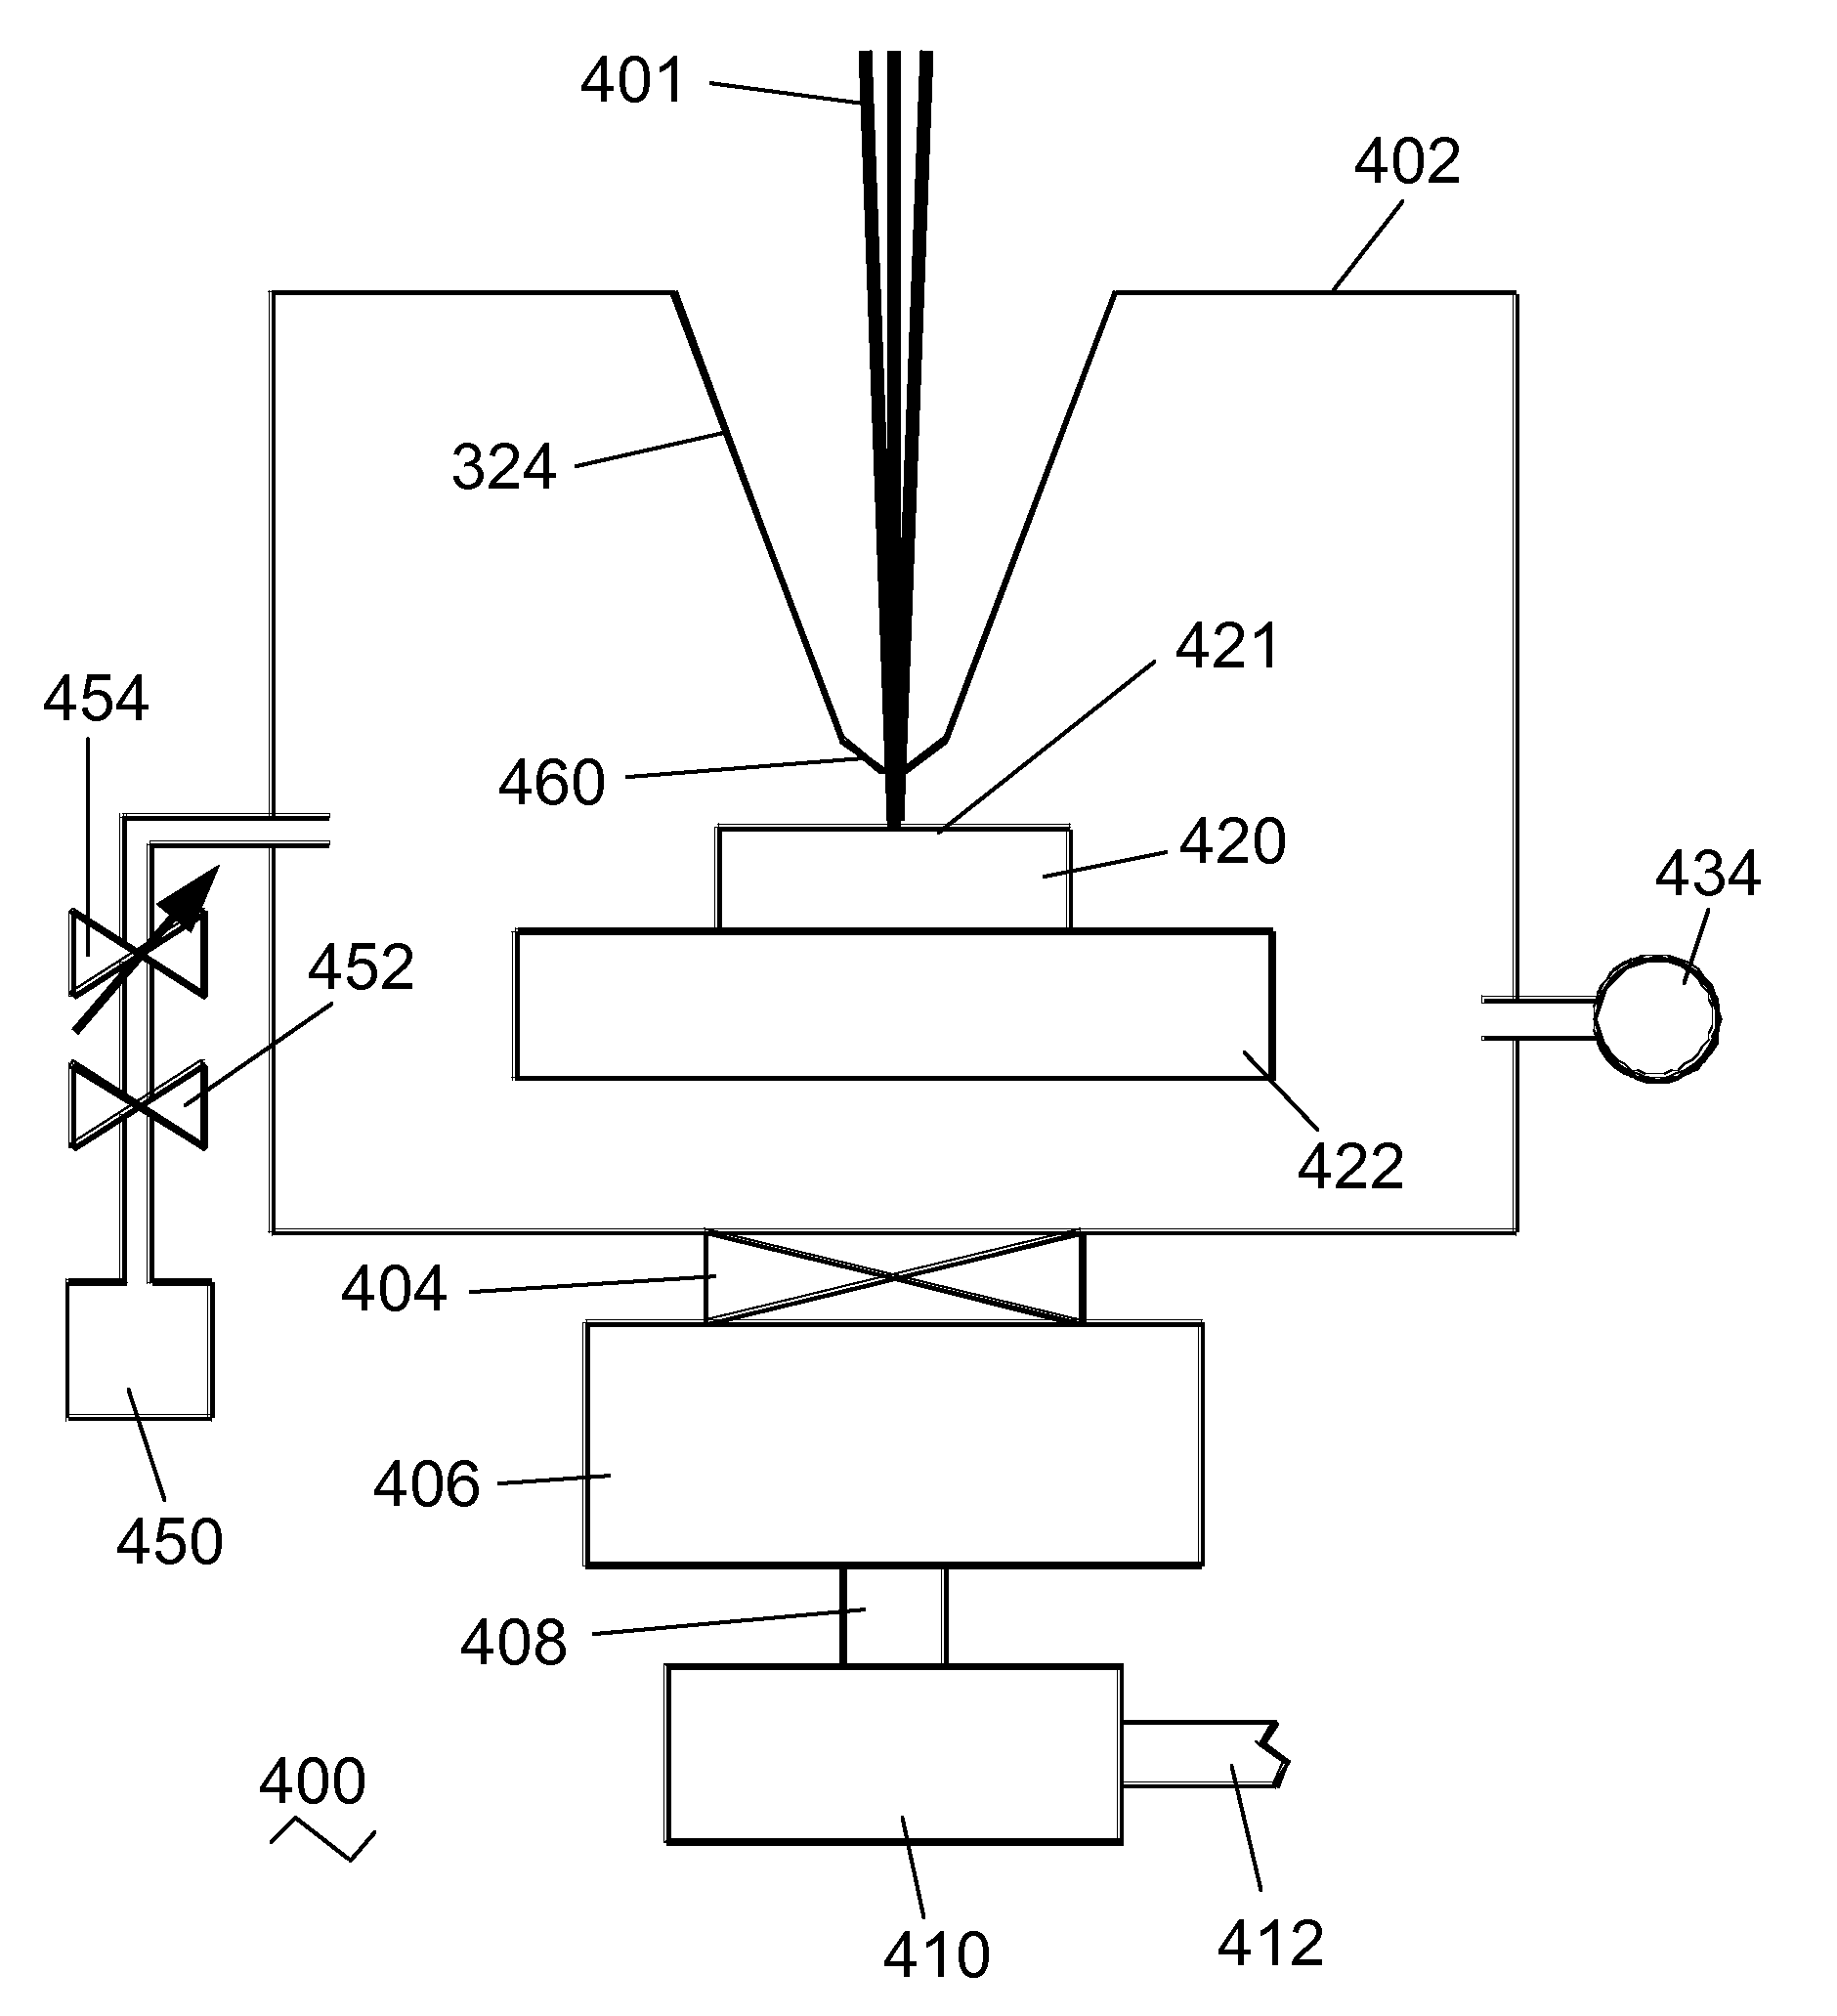 Use of nitrogen-based reducing compounds in beam-induced processing